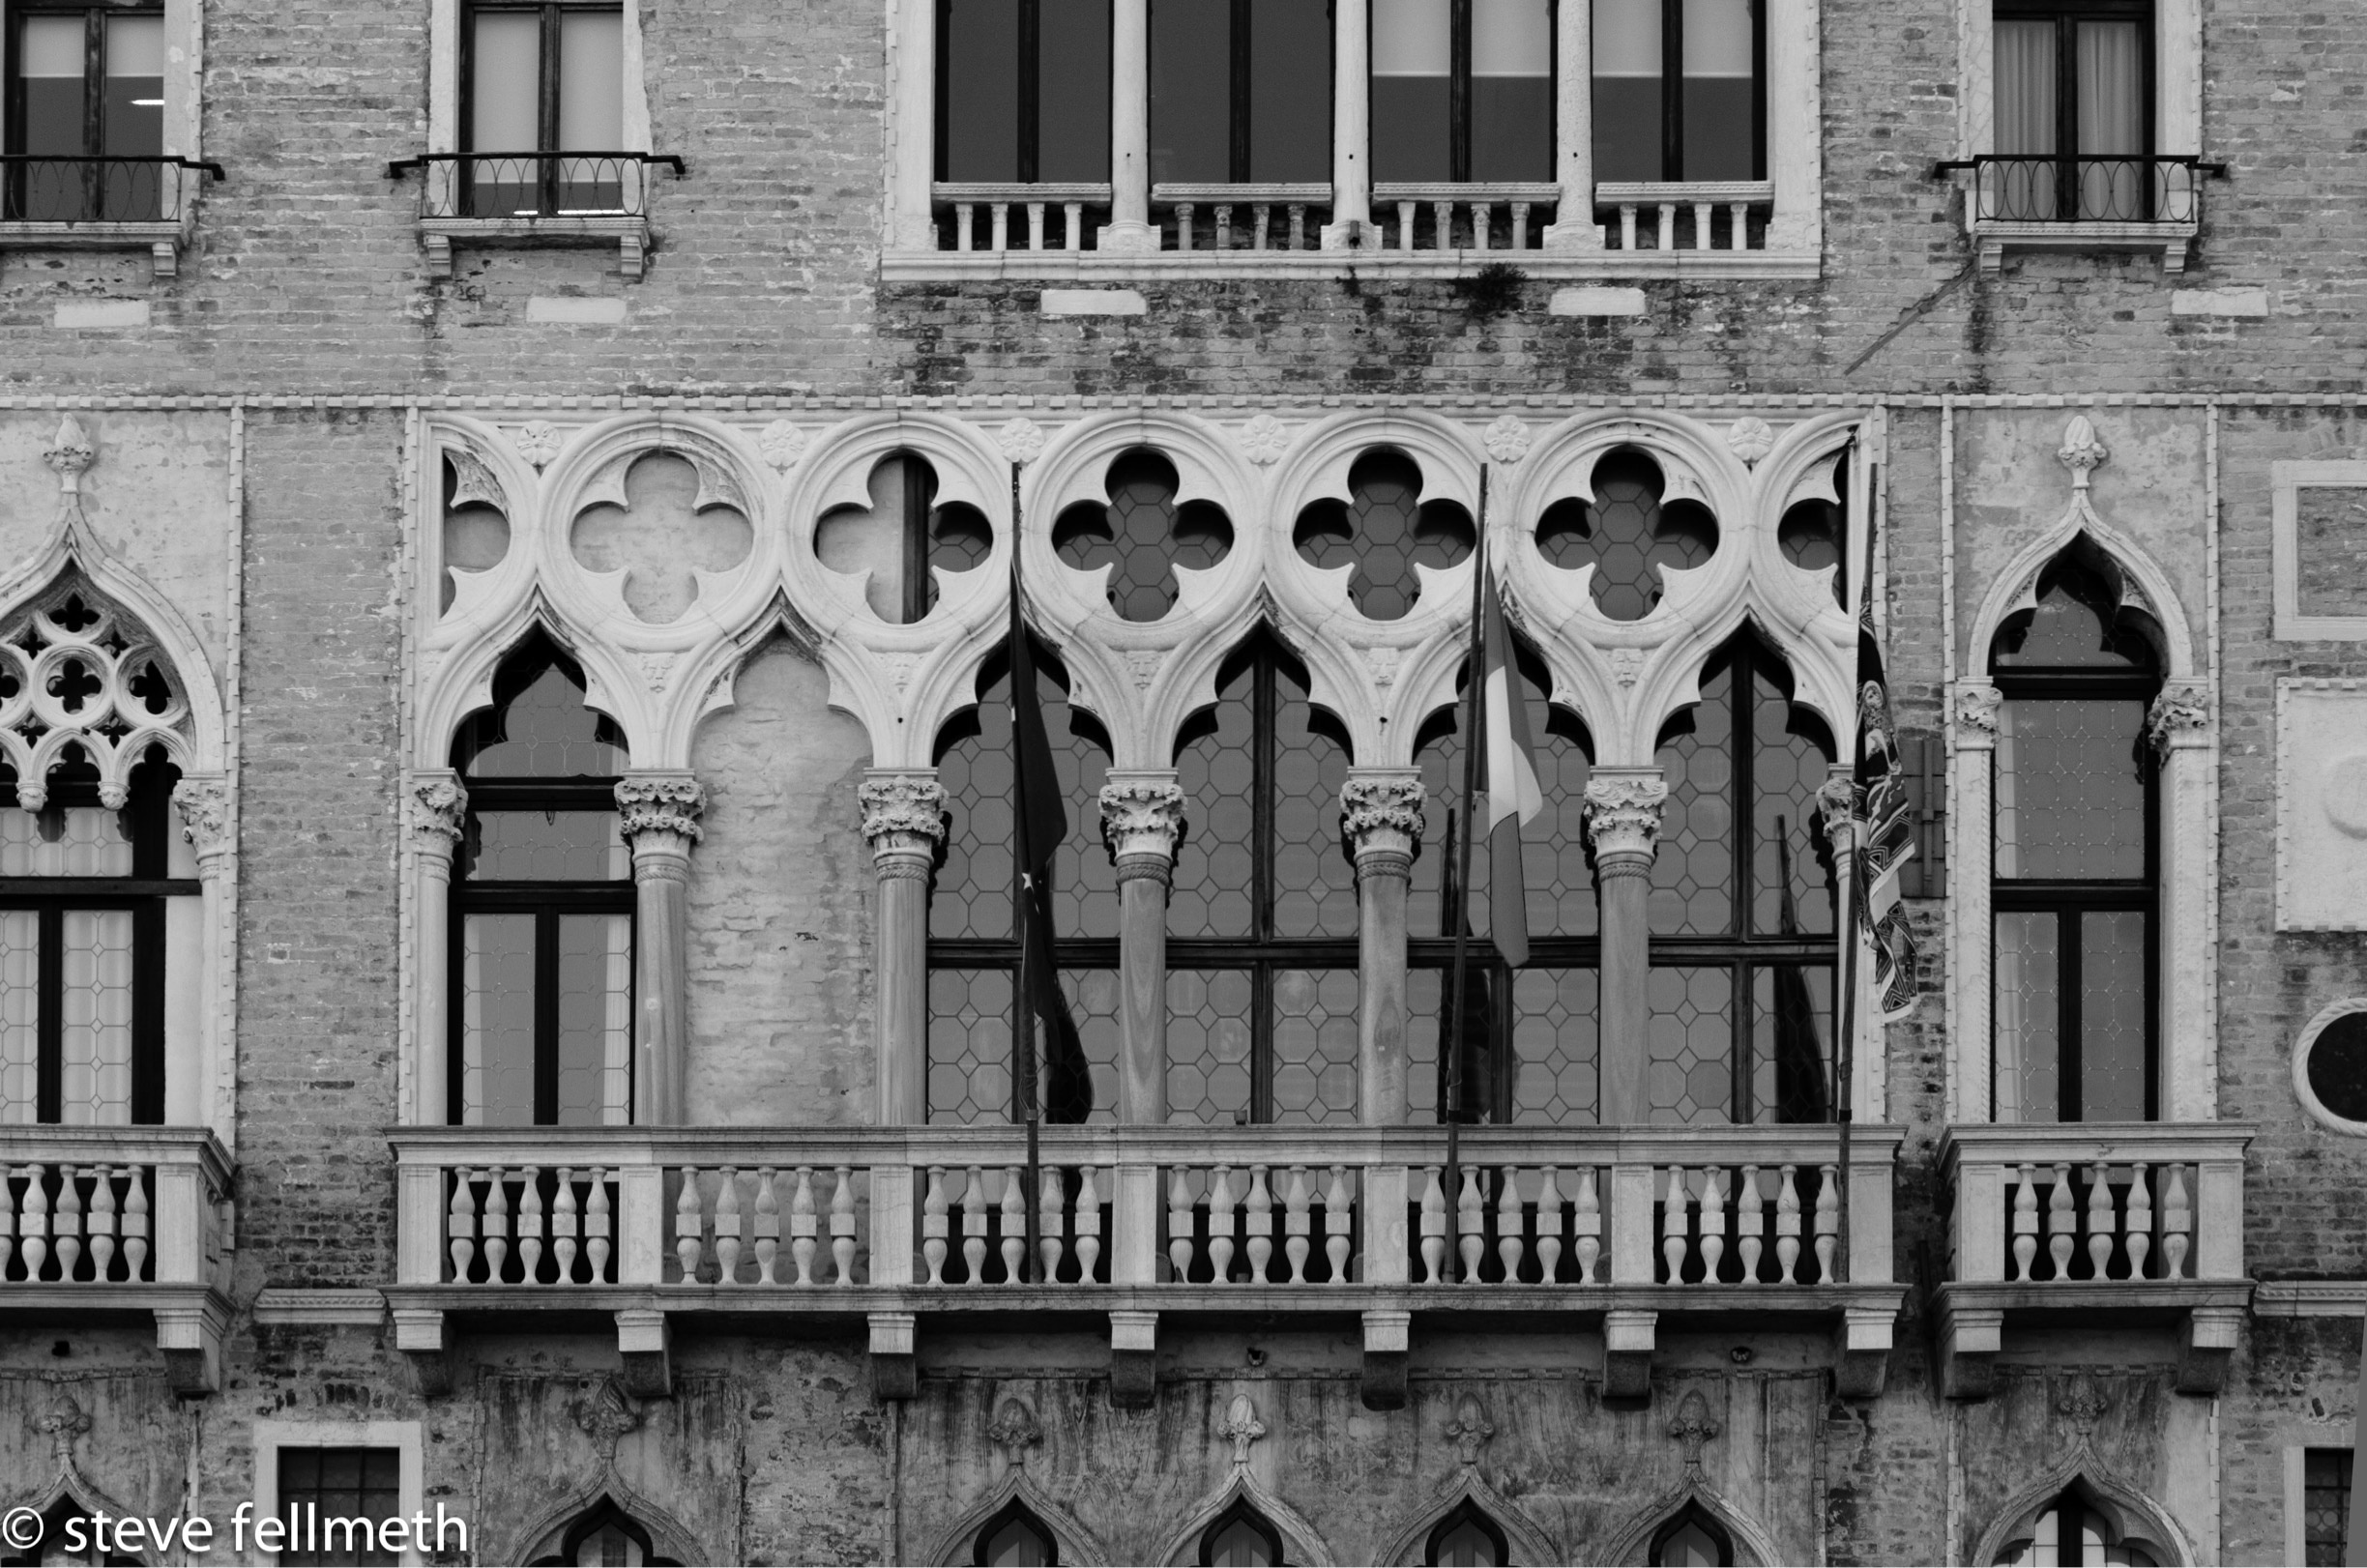 One of the many amazing architectural facades in Venice #details